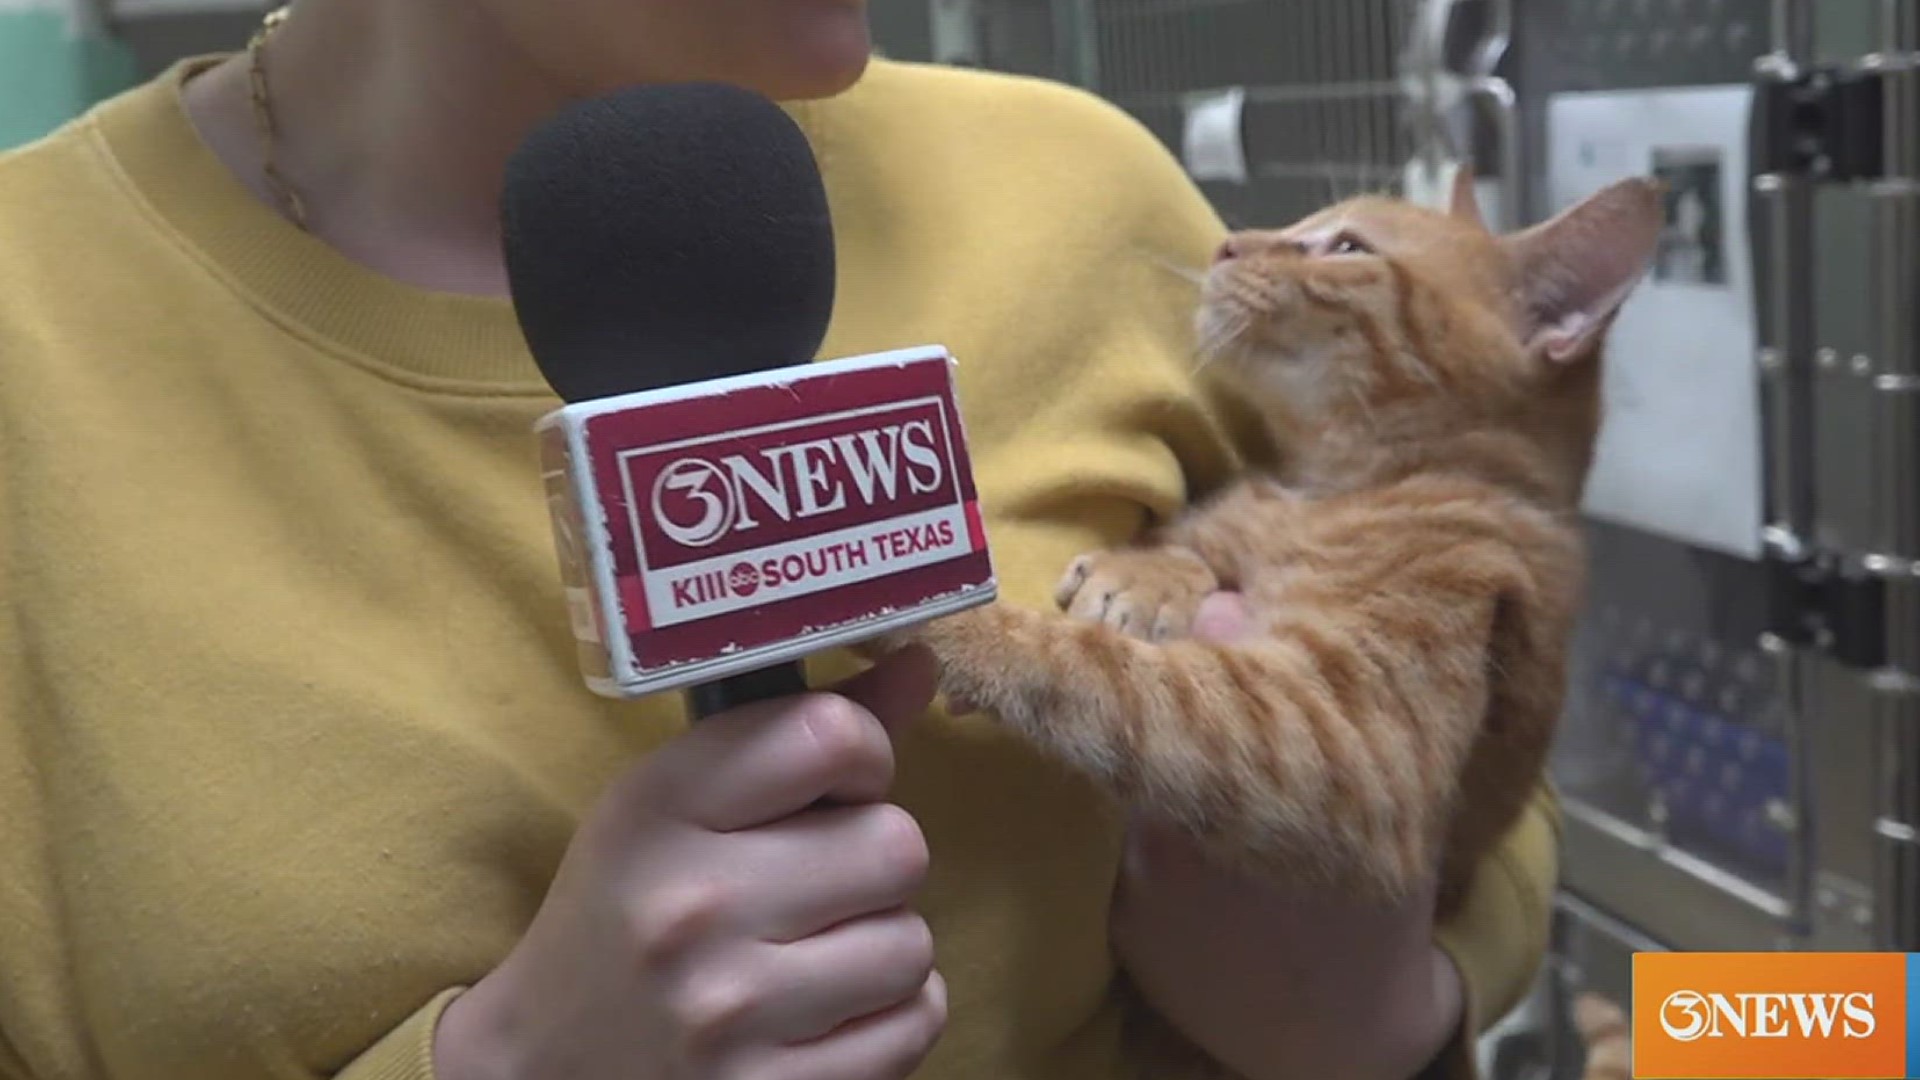 Orange cat behavior? This one-year-old cutie wants you to head on out to the Gulf Coast Humane Society to meet his cool cat friends and maybe even take one home!